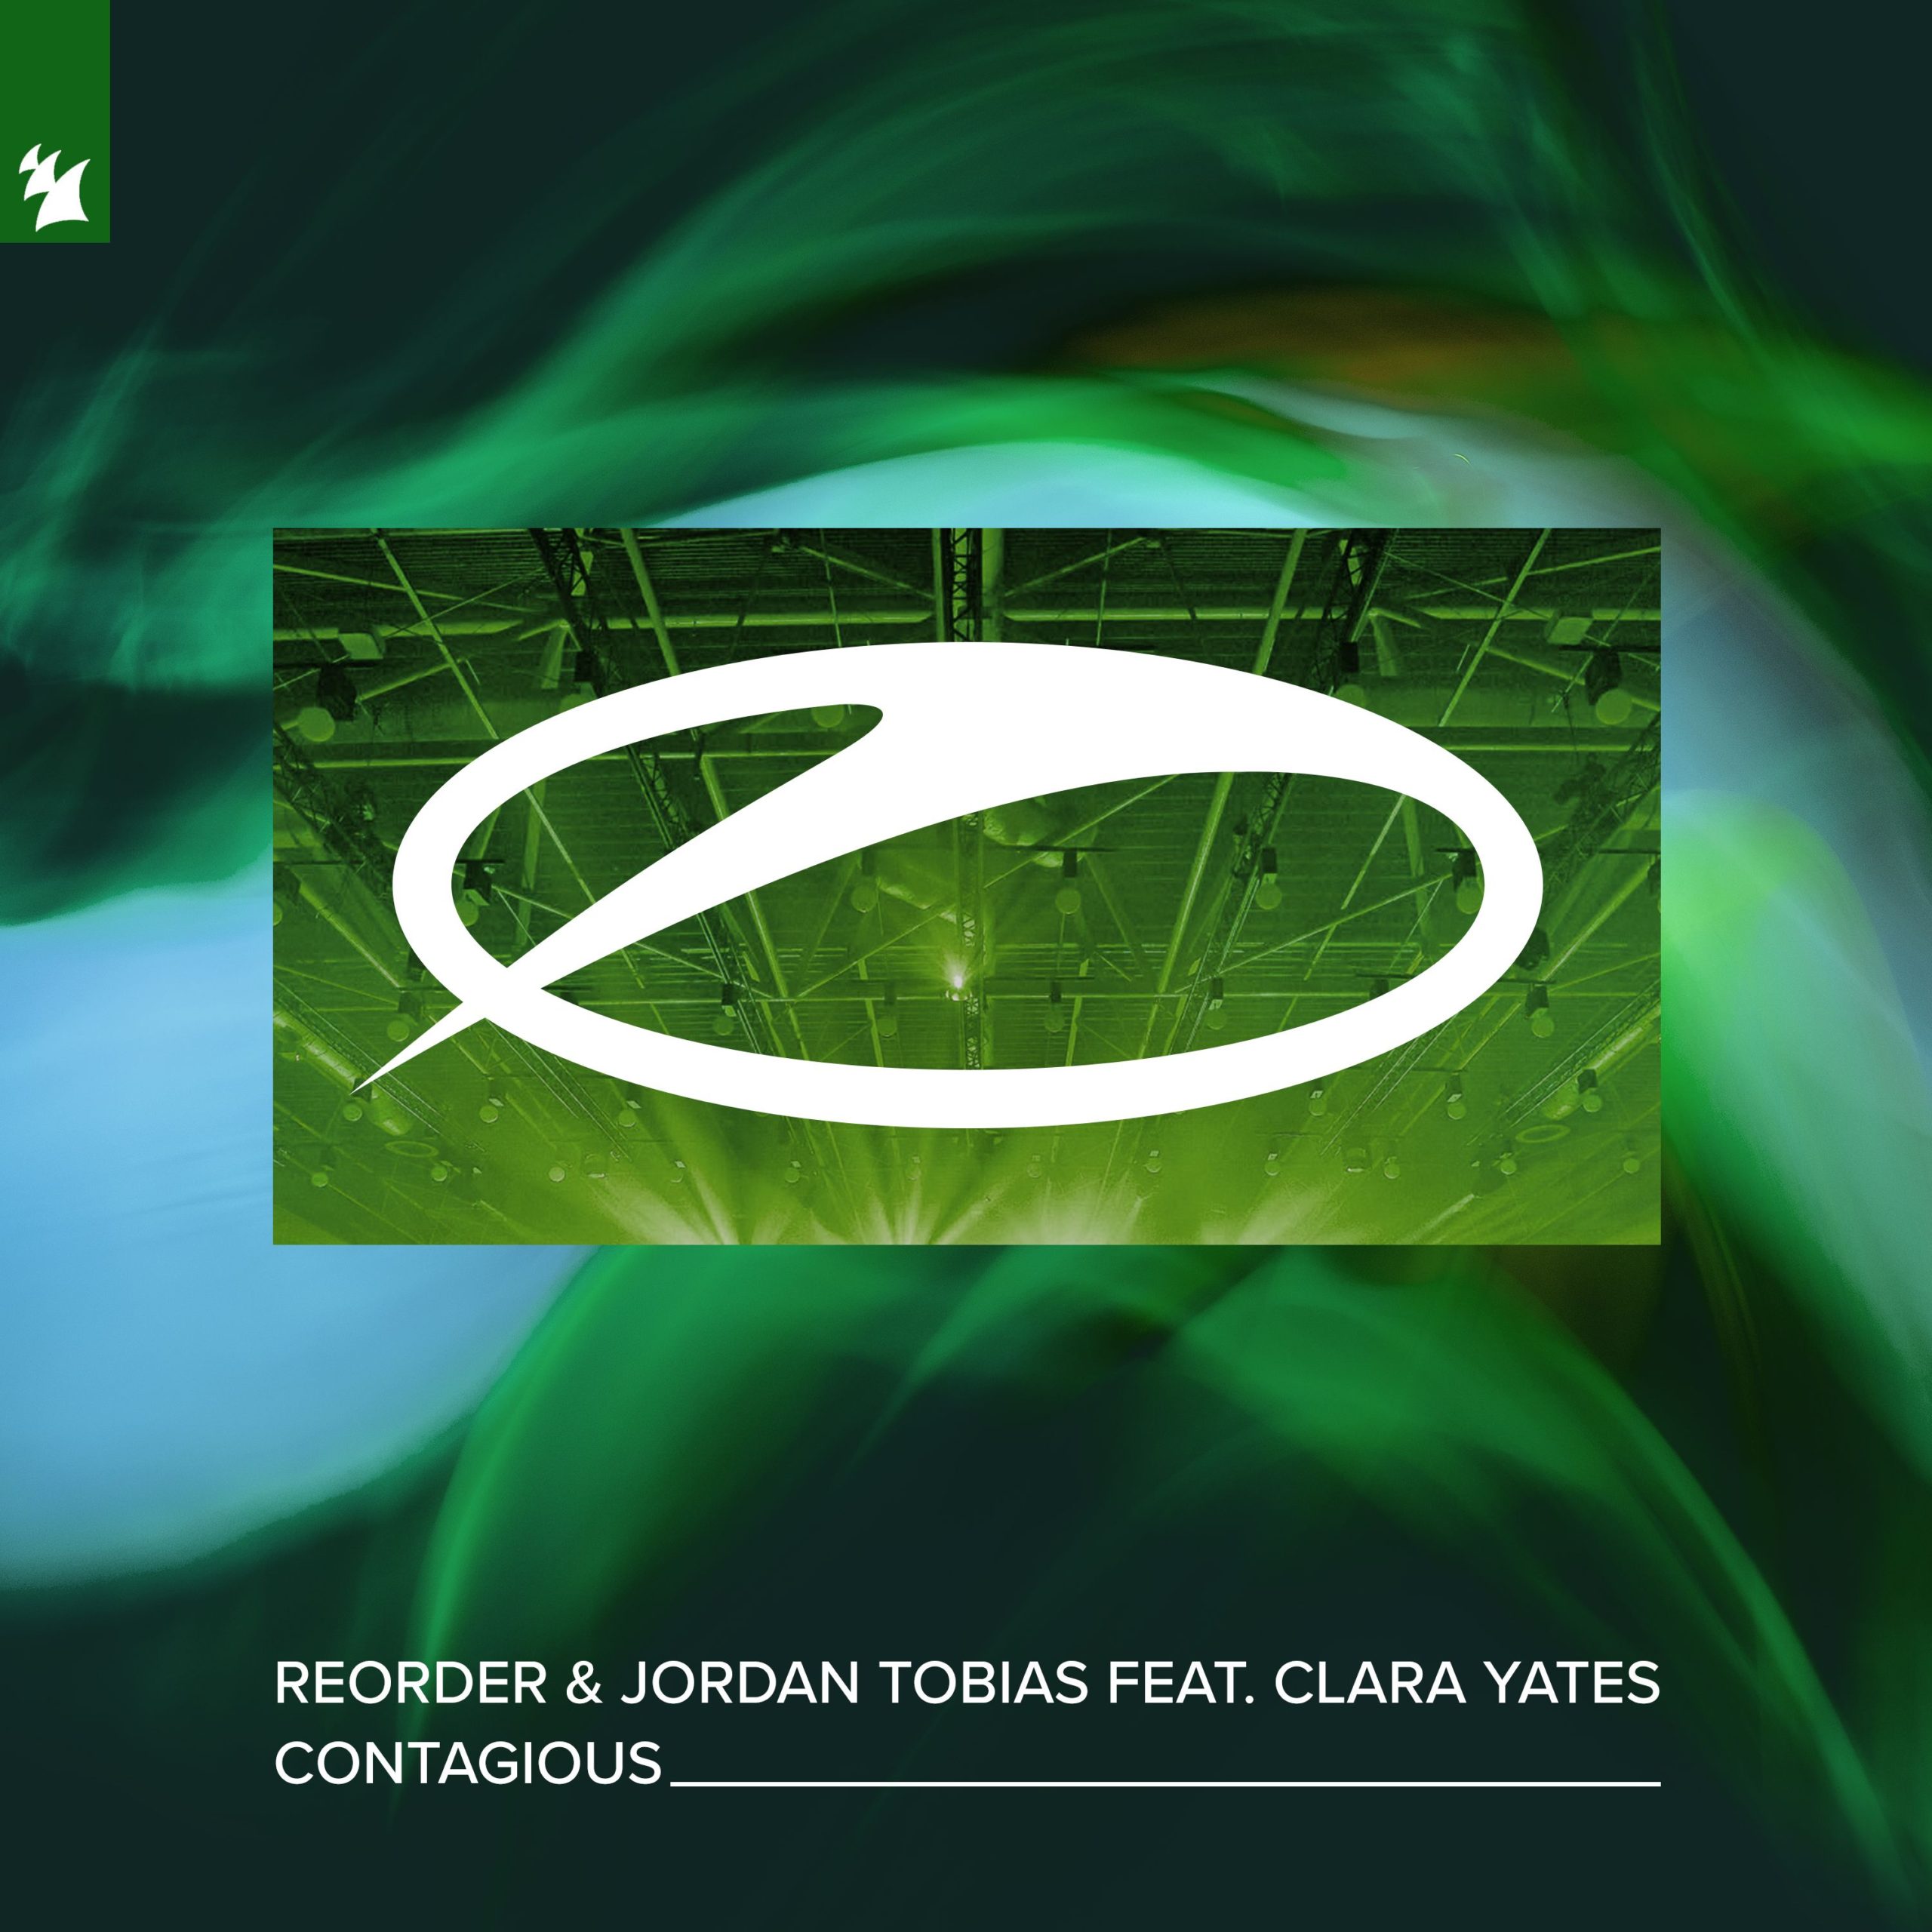 ReOrder and Jordan Tobias feat. Clara Yates presents Contagious on A State Of Trance